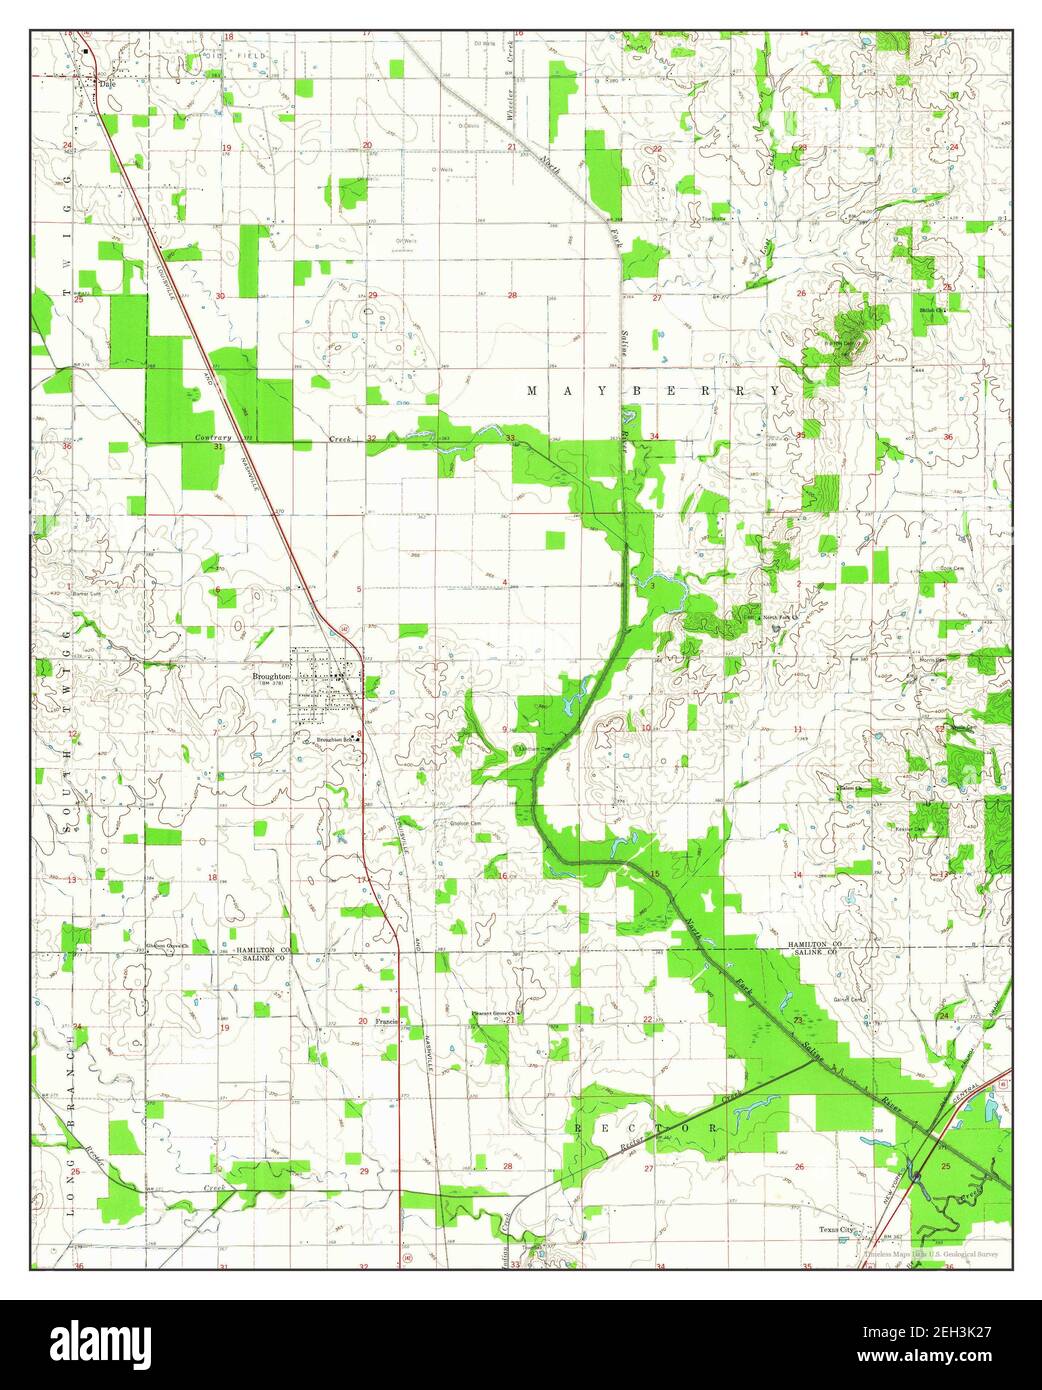 Broughton, Illinois, map 1963, 1:24000, United States of America by Timeless Maps, data U.S. Geological Survey Stock Photo